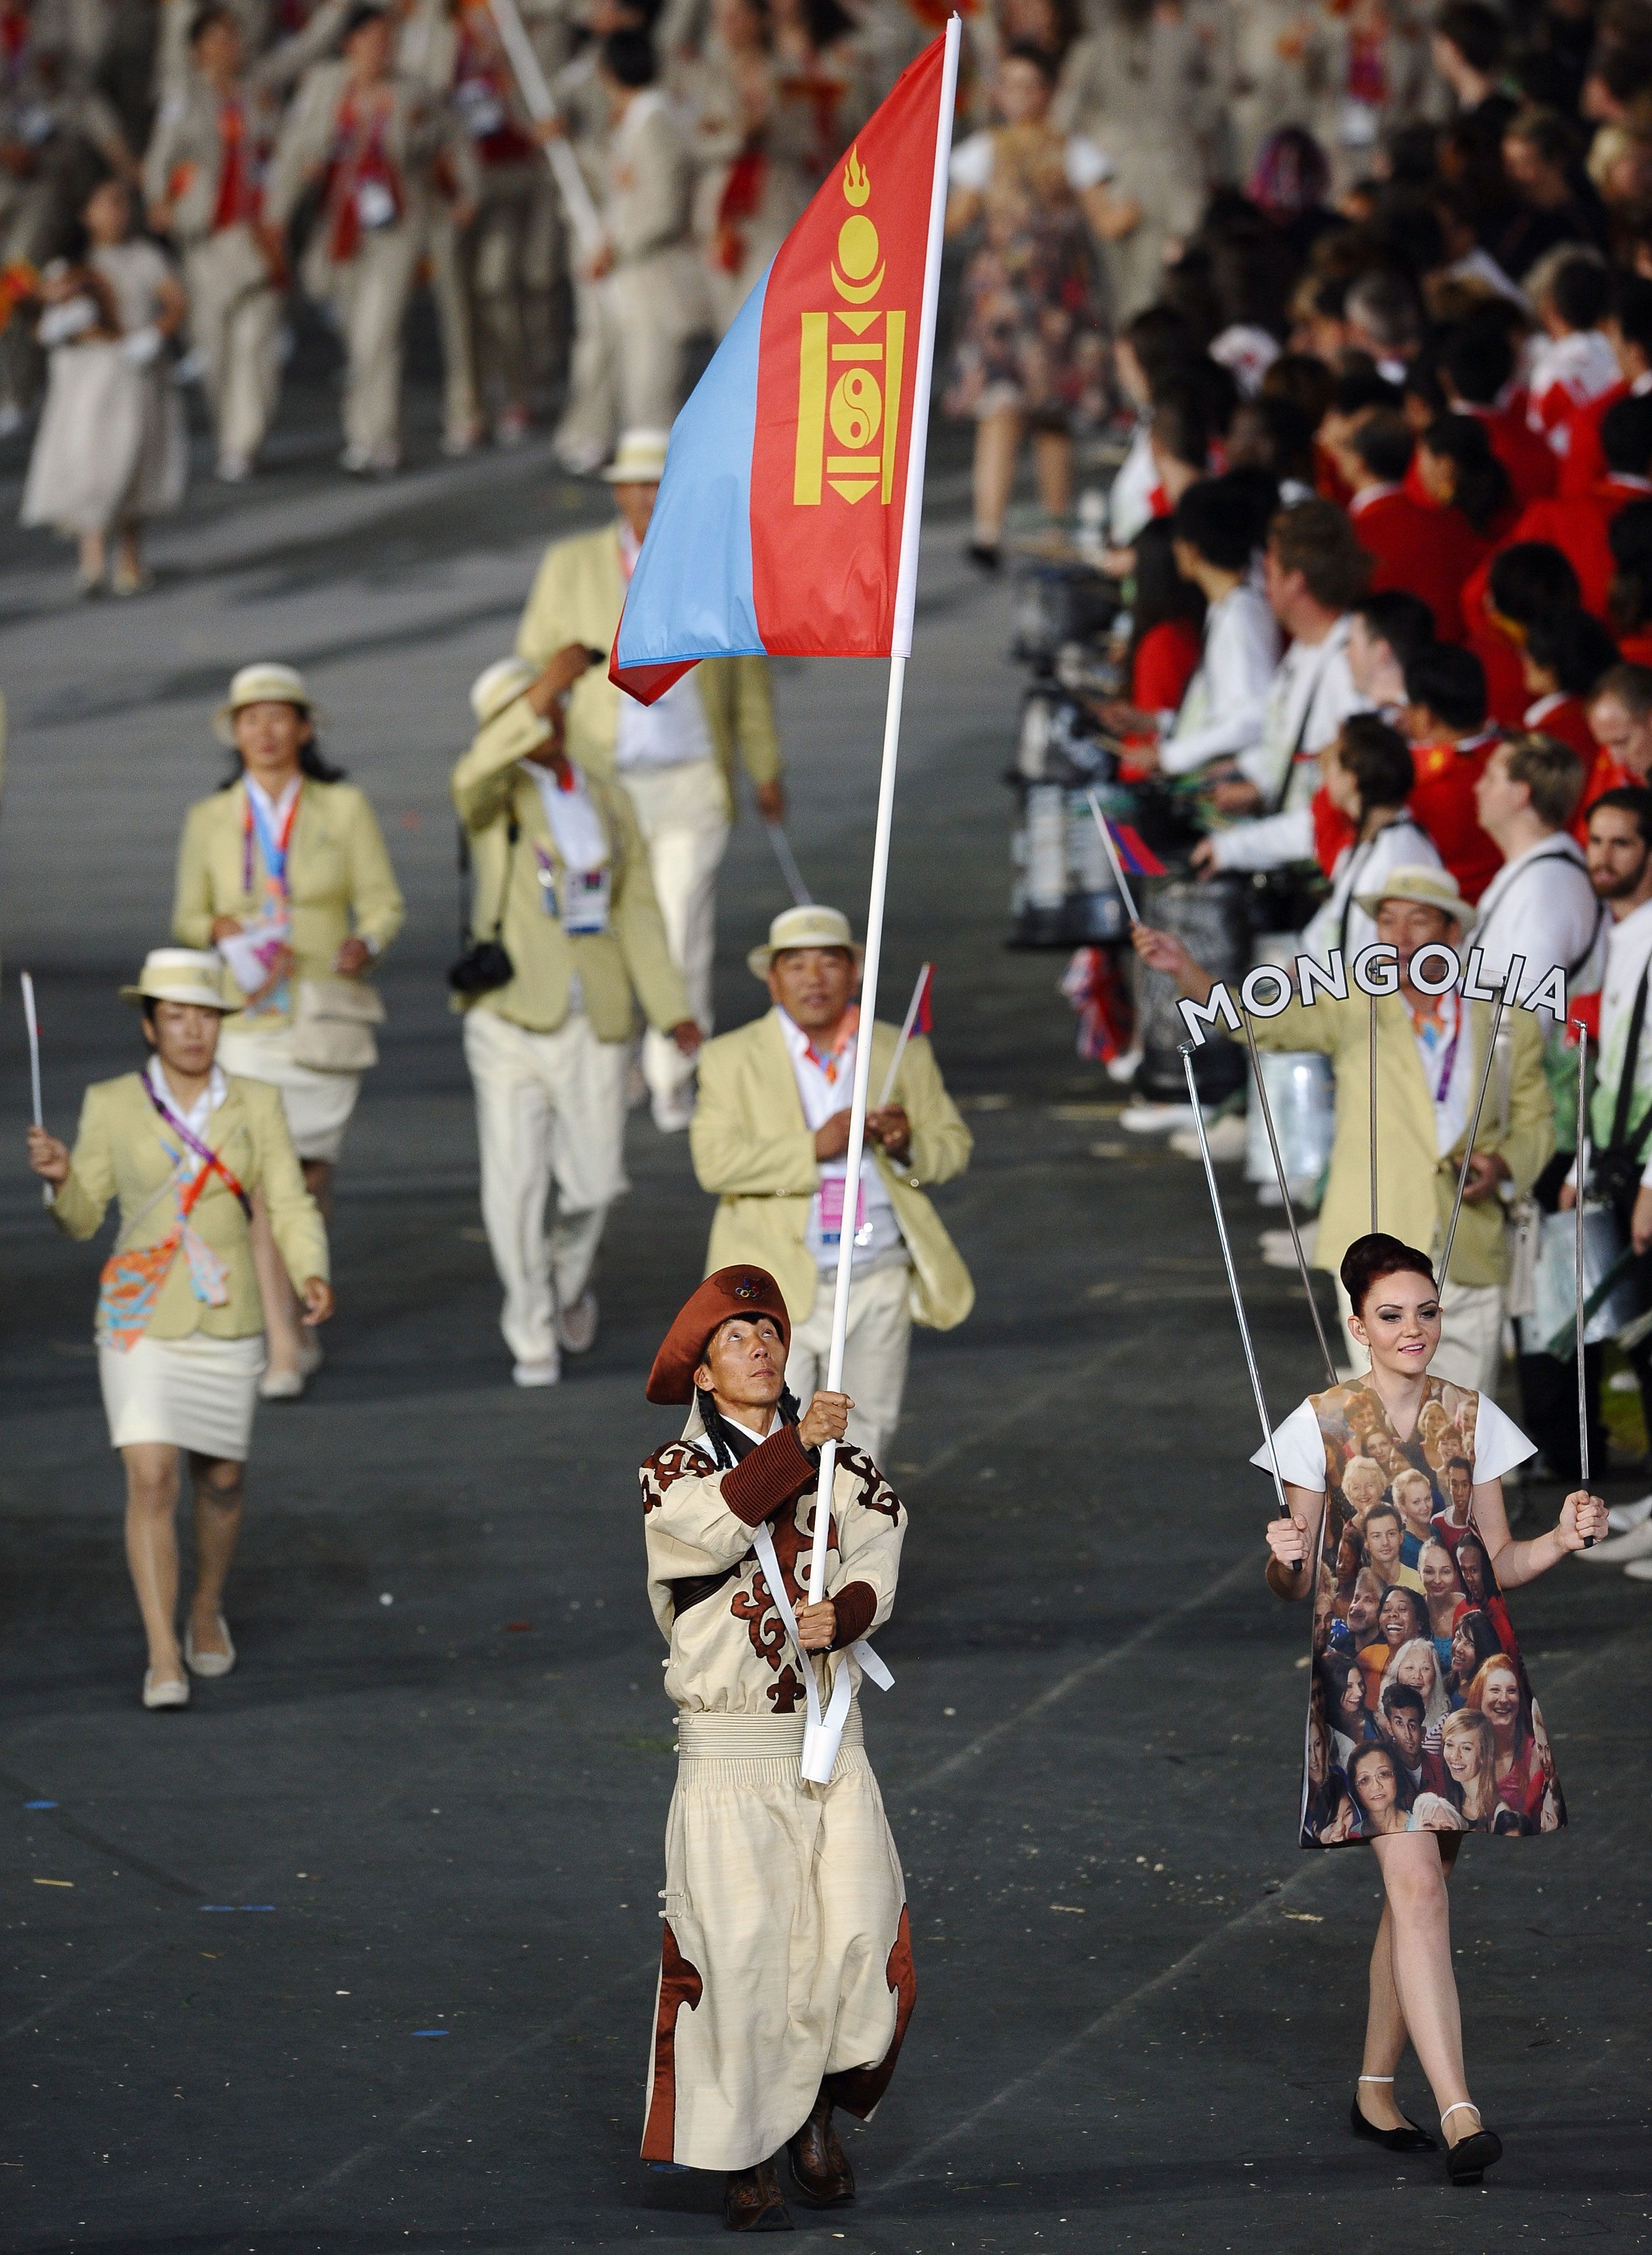 Mongolian Ser-Od Bat-Ochir carries his country's flag during the opening ceremony of the London 2012 Olympics.